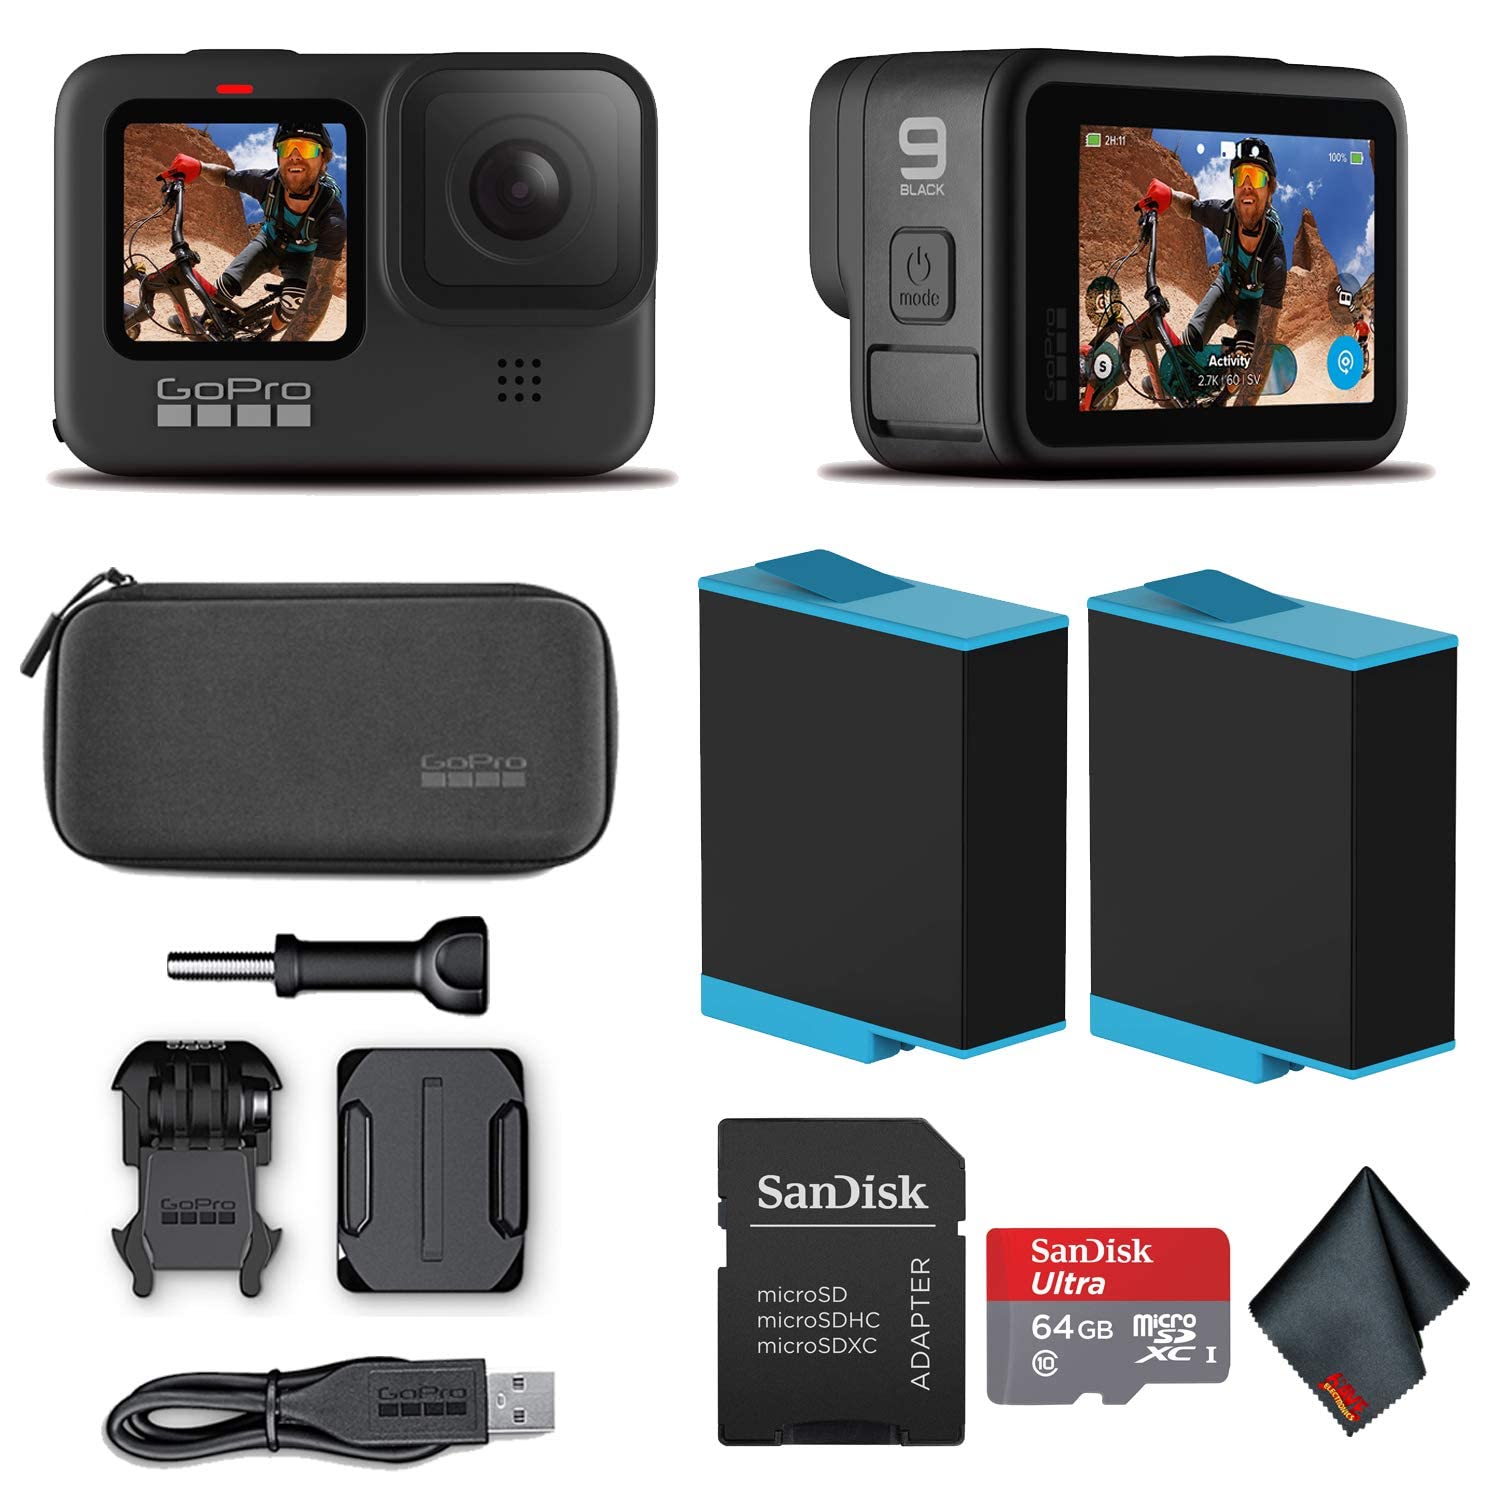 GoPro HERO9 Black - Waterproof Action Camera with Front LCD and Touch Rear Screens, 5K HD Video, 20MP Photos, 1080p Live Streaming, Stabilization + Sandisk 64GB Card and Extra Battery